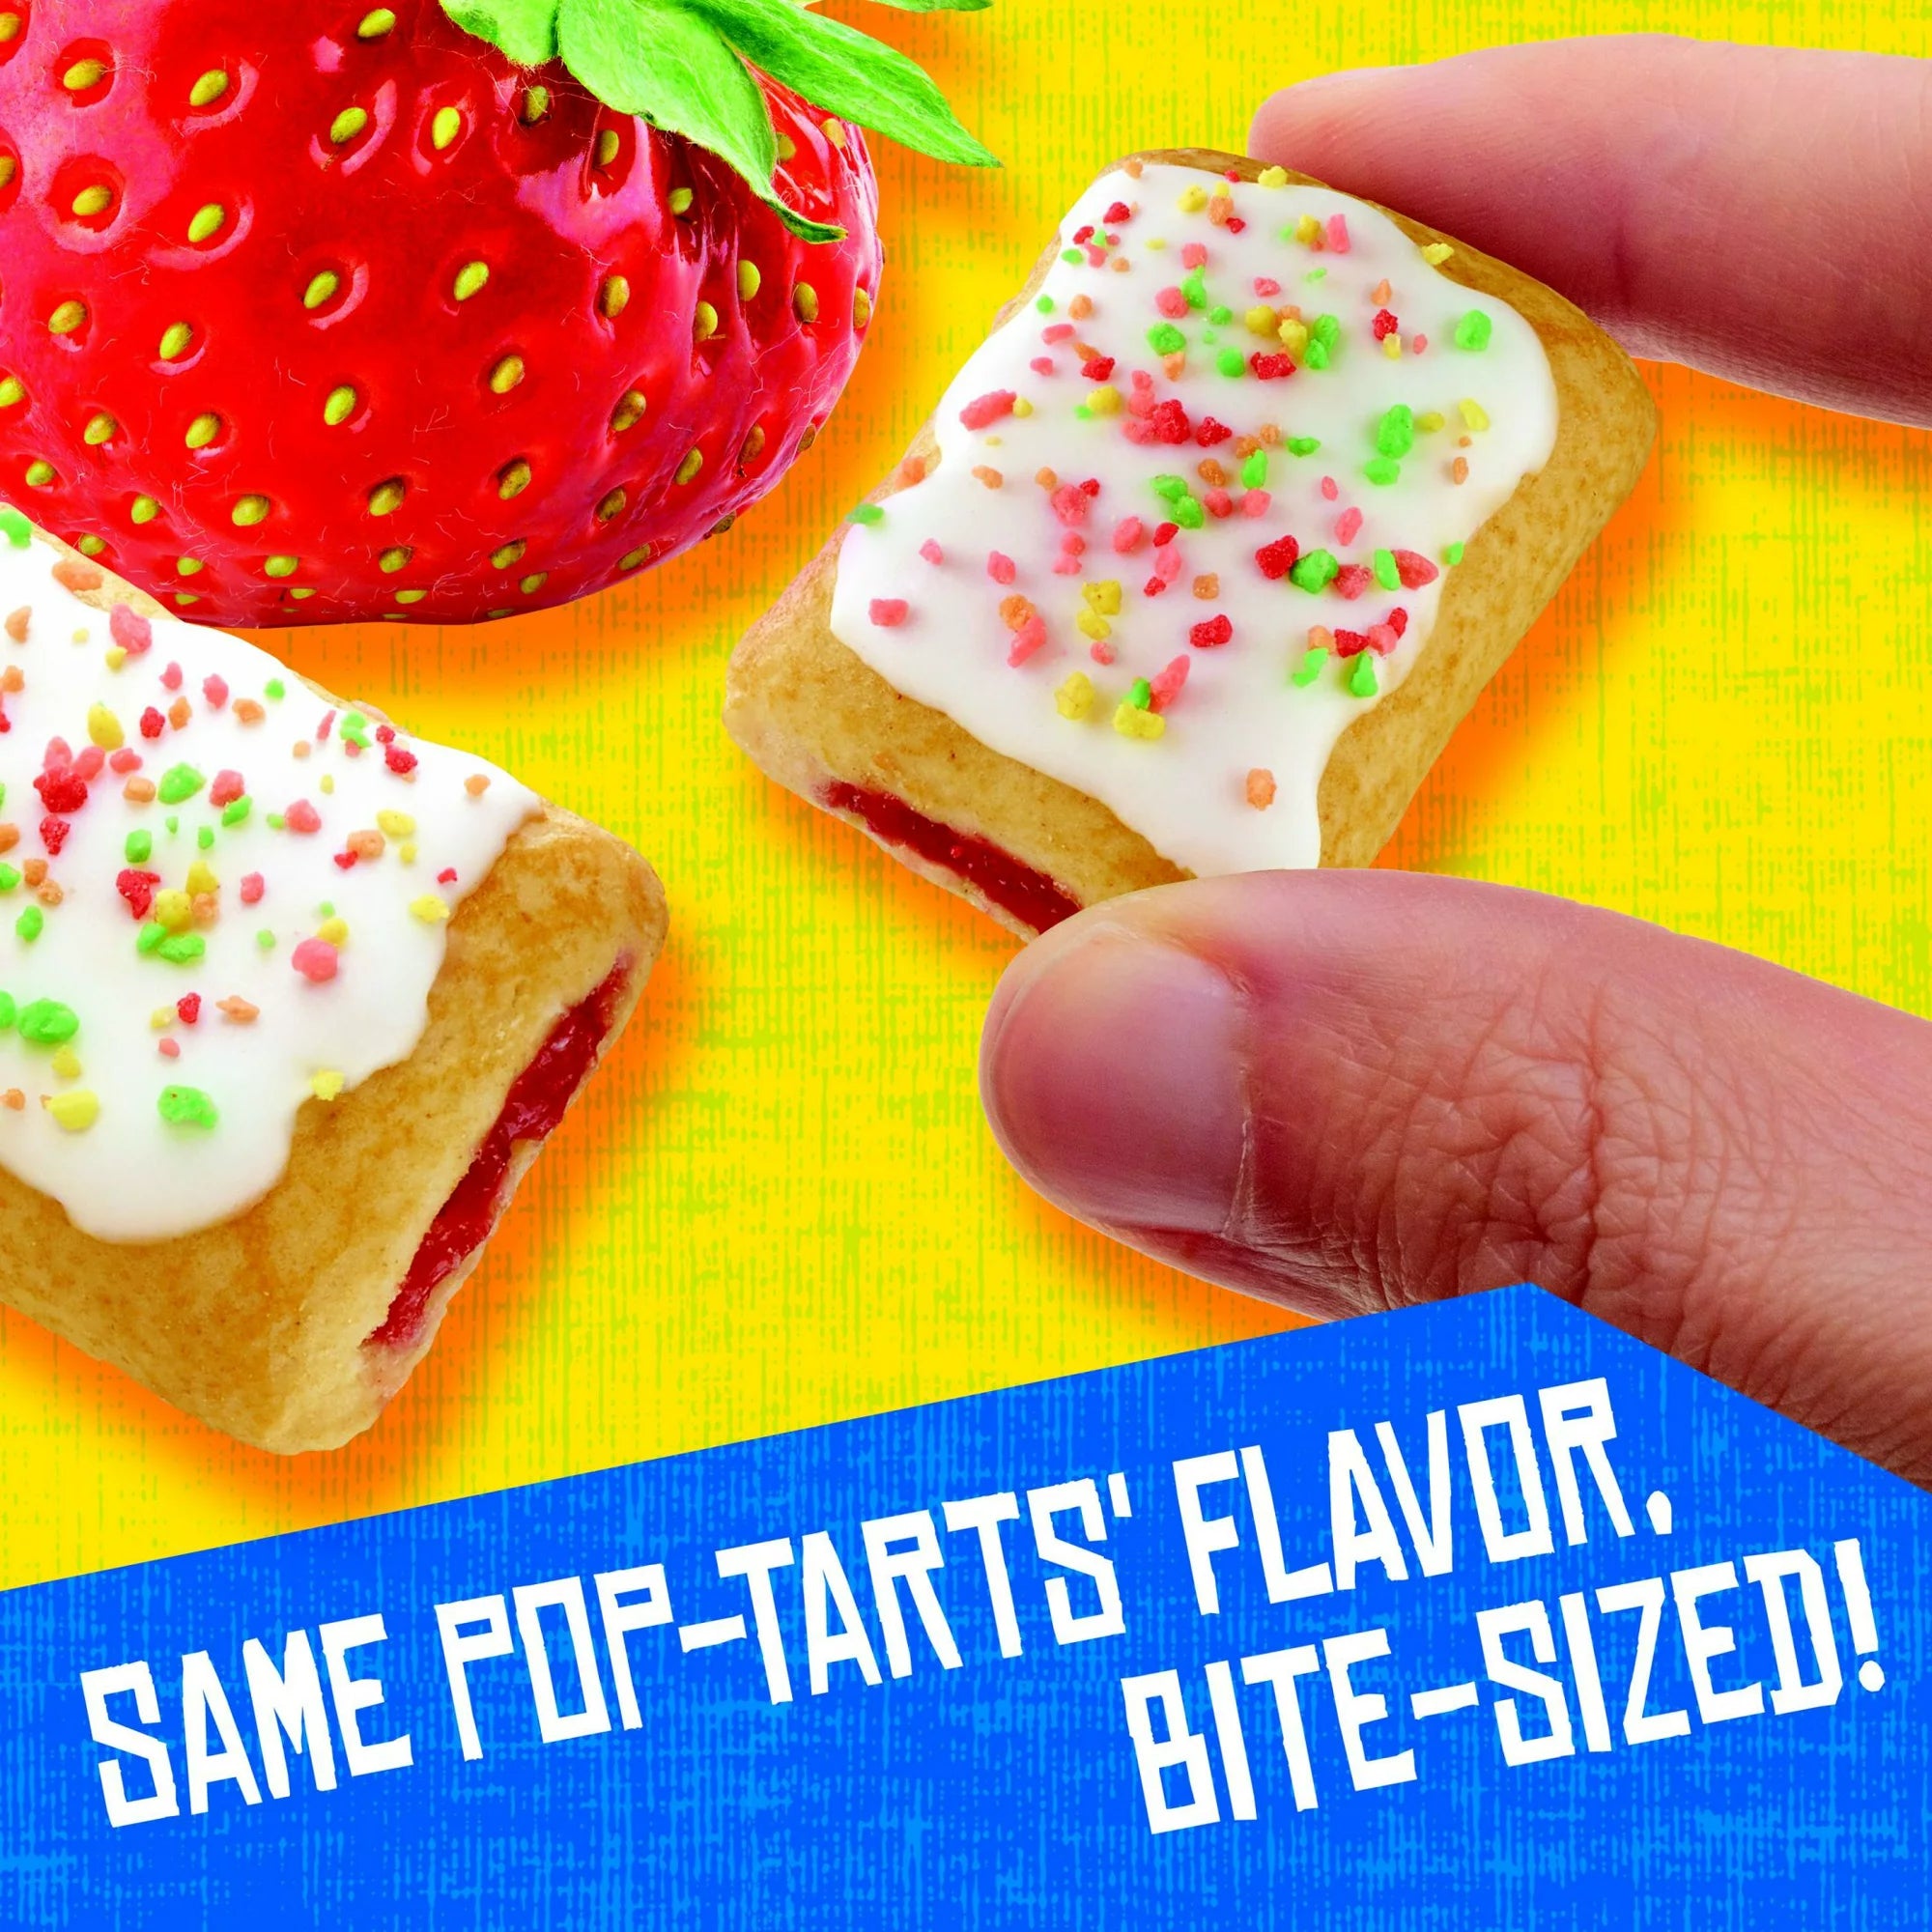 Pop-Tarts Frosted Strawberry Baked Pastry Bites, Shelf-Stable, Ready-to-Eat, Instant, 10 Count Box